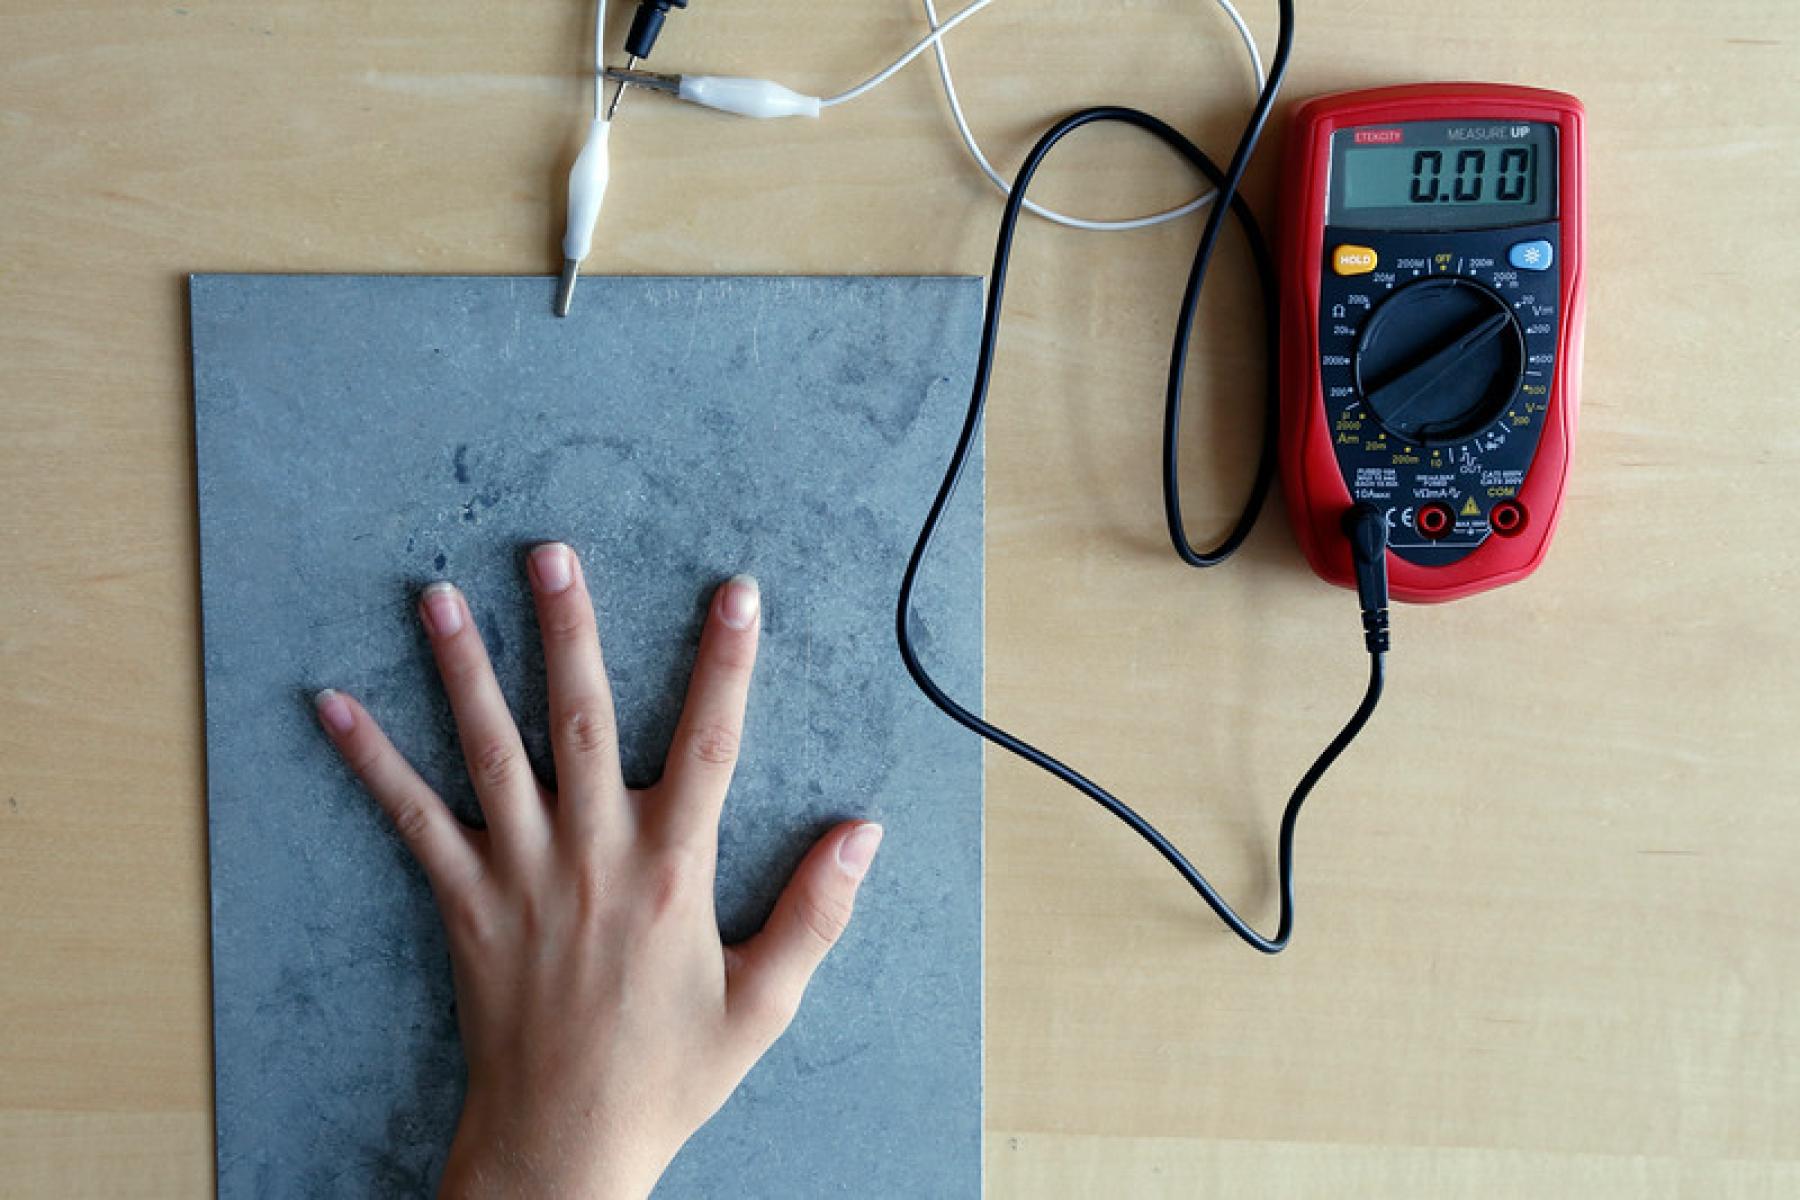 Participant's hands touching the steel plate, connected to a multimeter